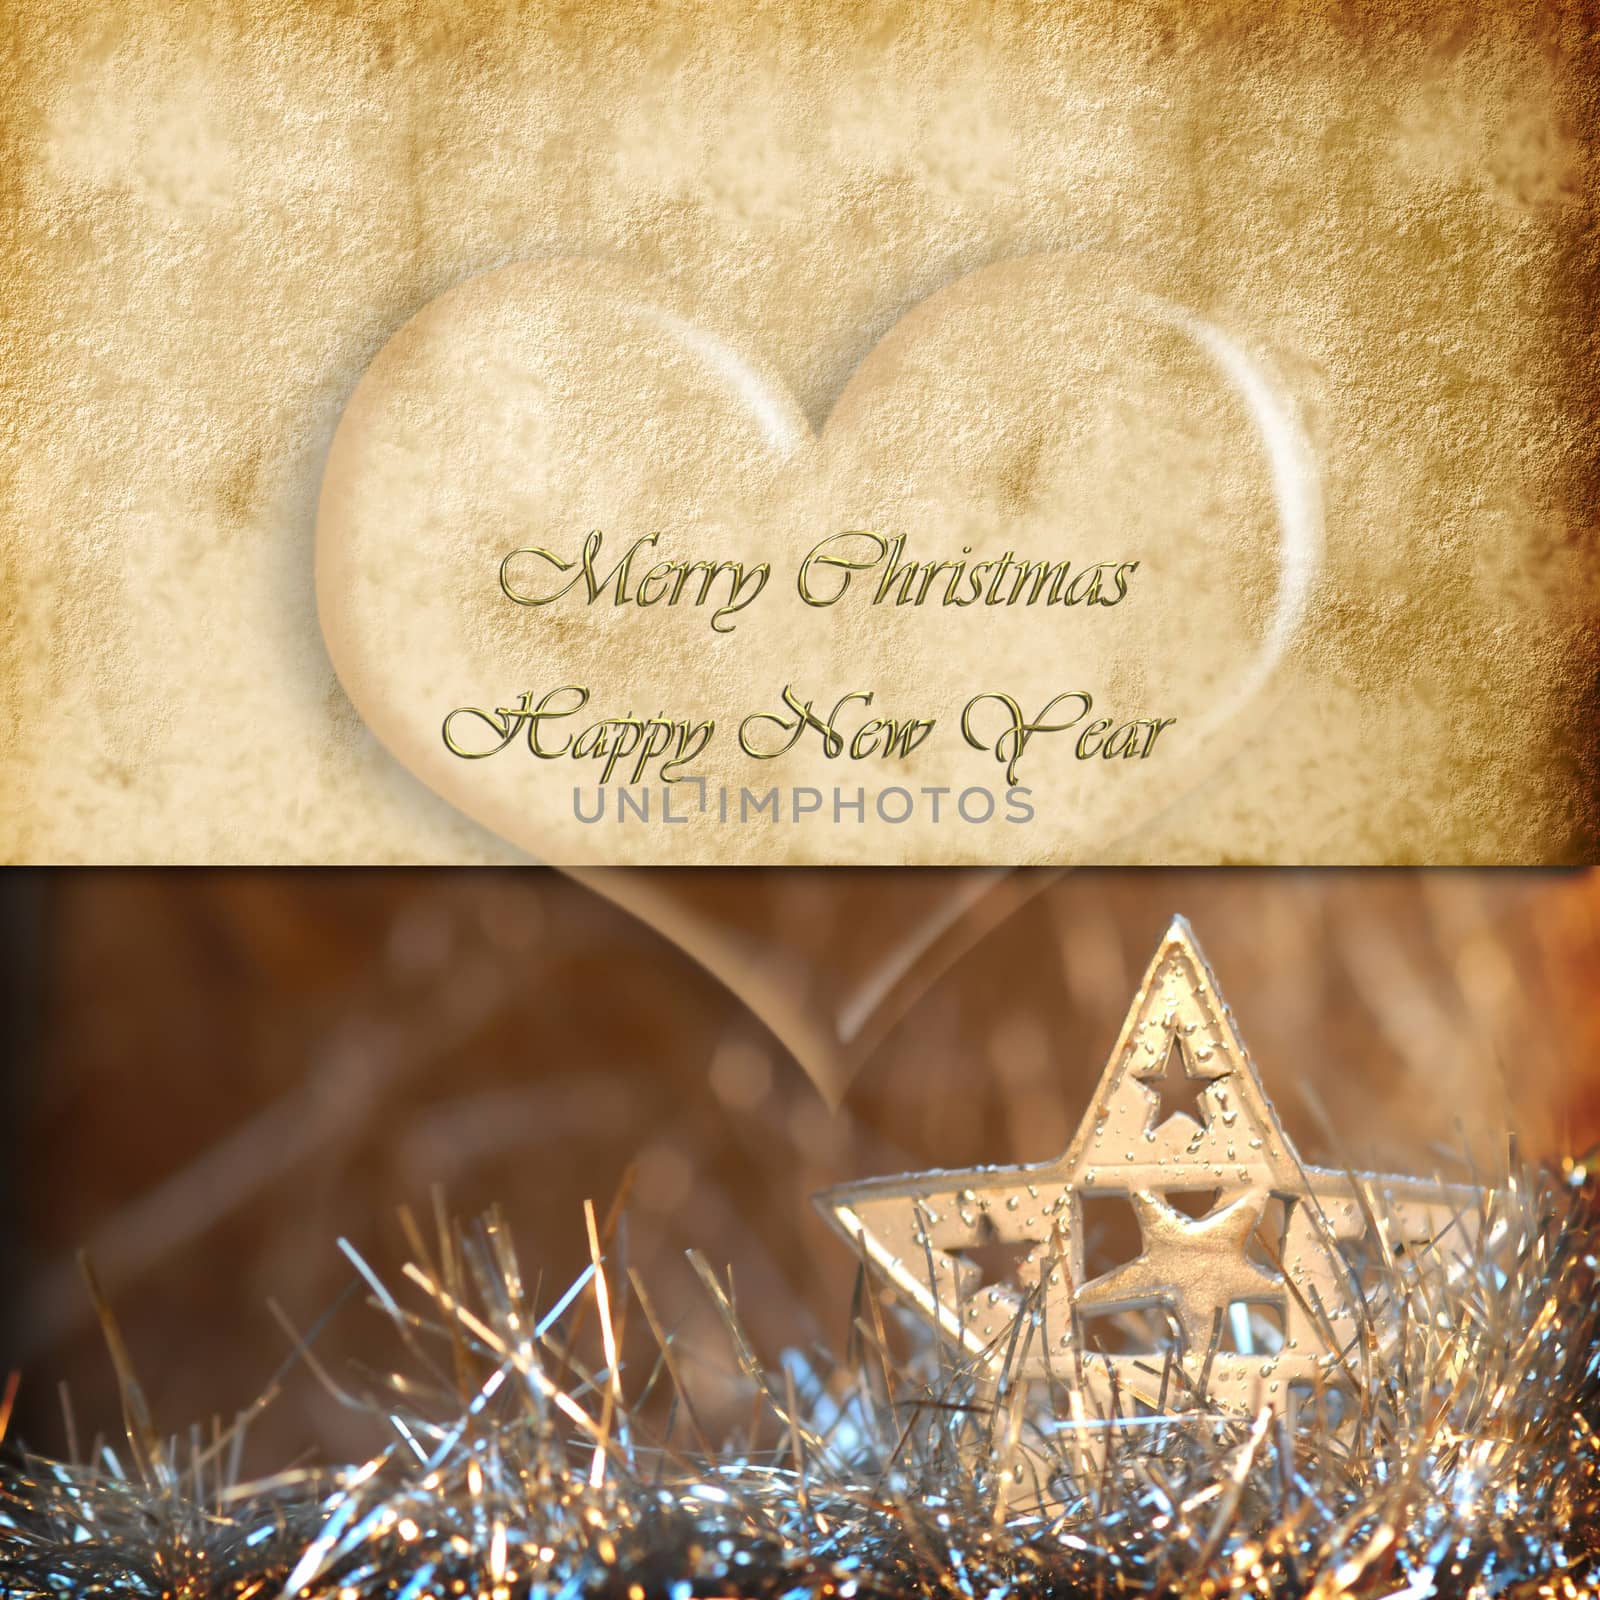 Lovely christmas greeting card by Carche